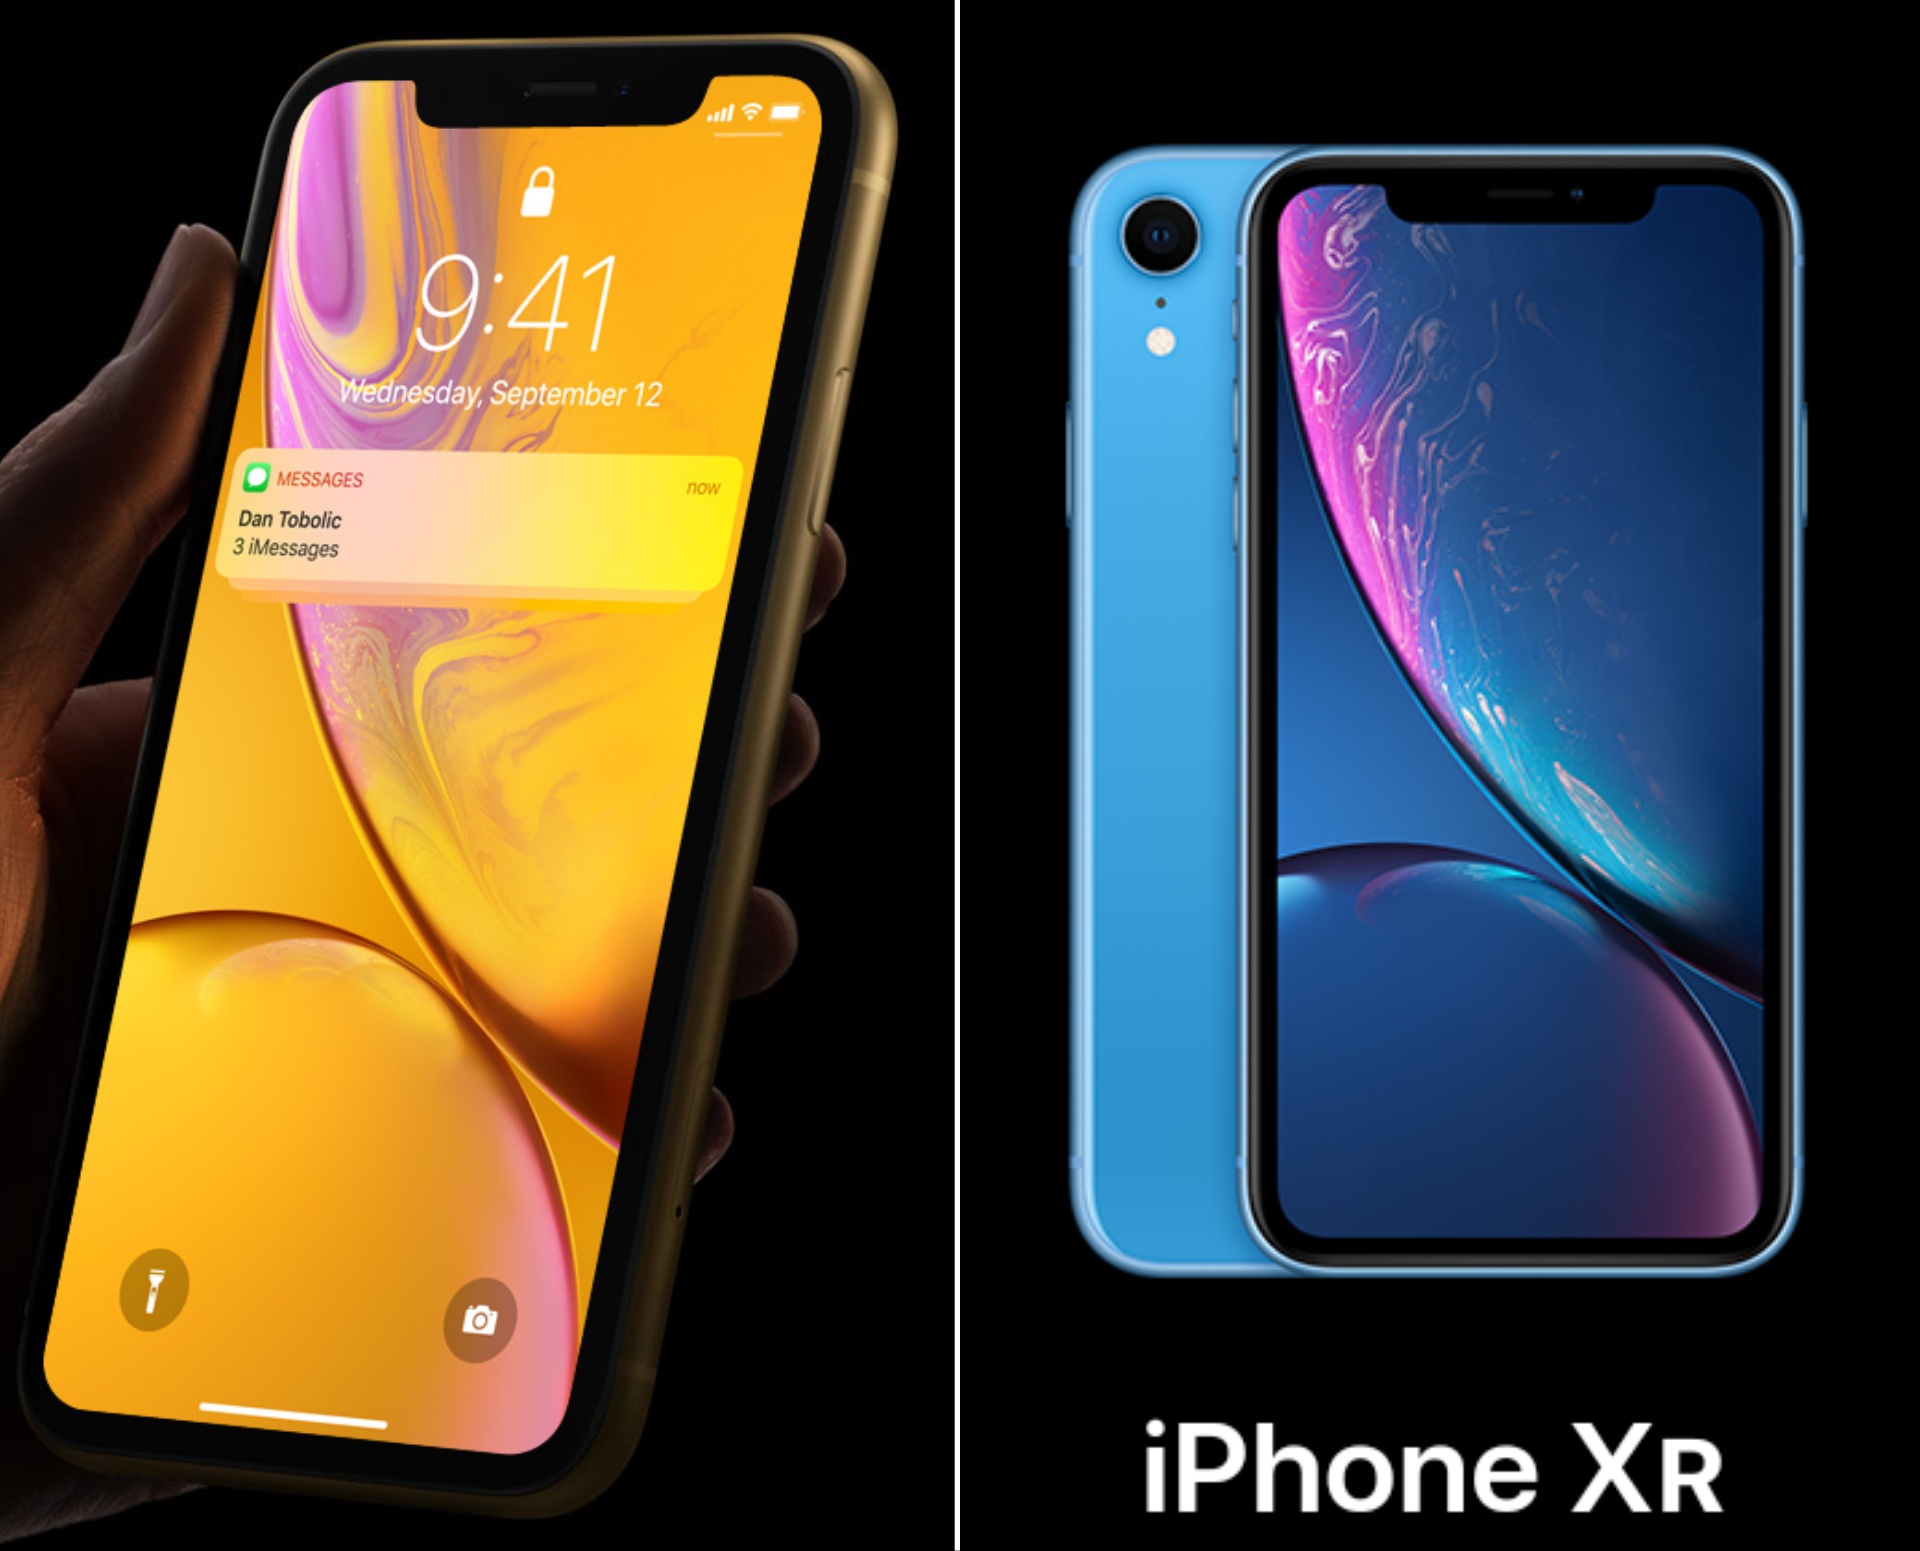 Apple iPhone XR Specs, Video Review and Price - Mobile Crypto Tech